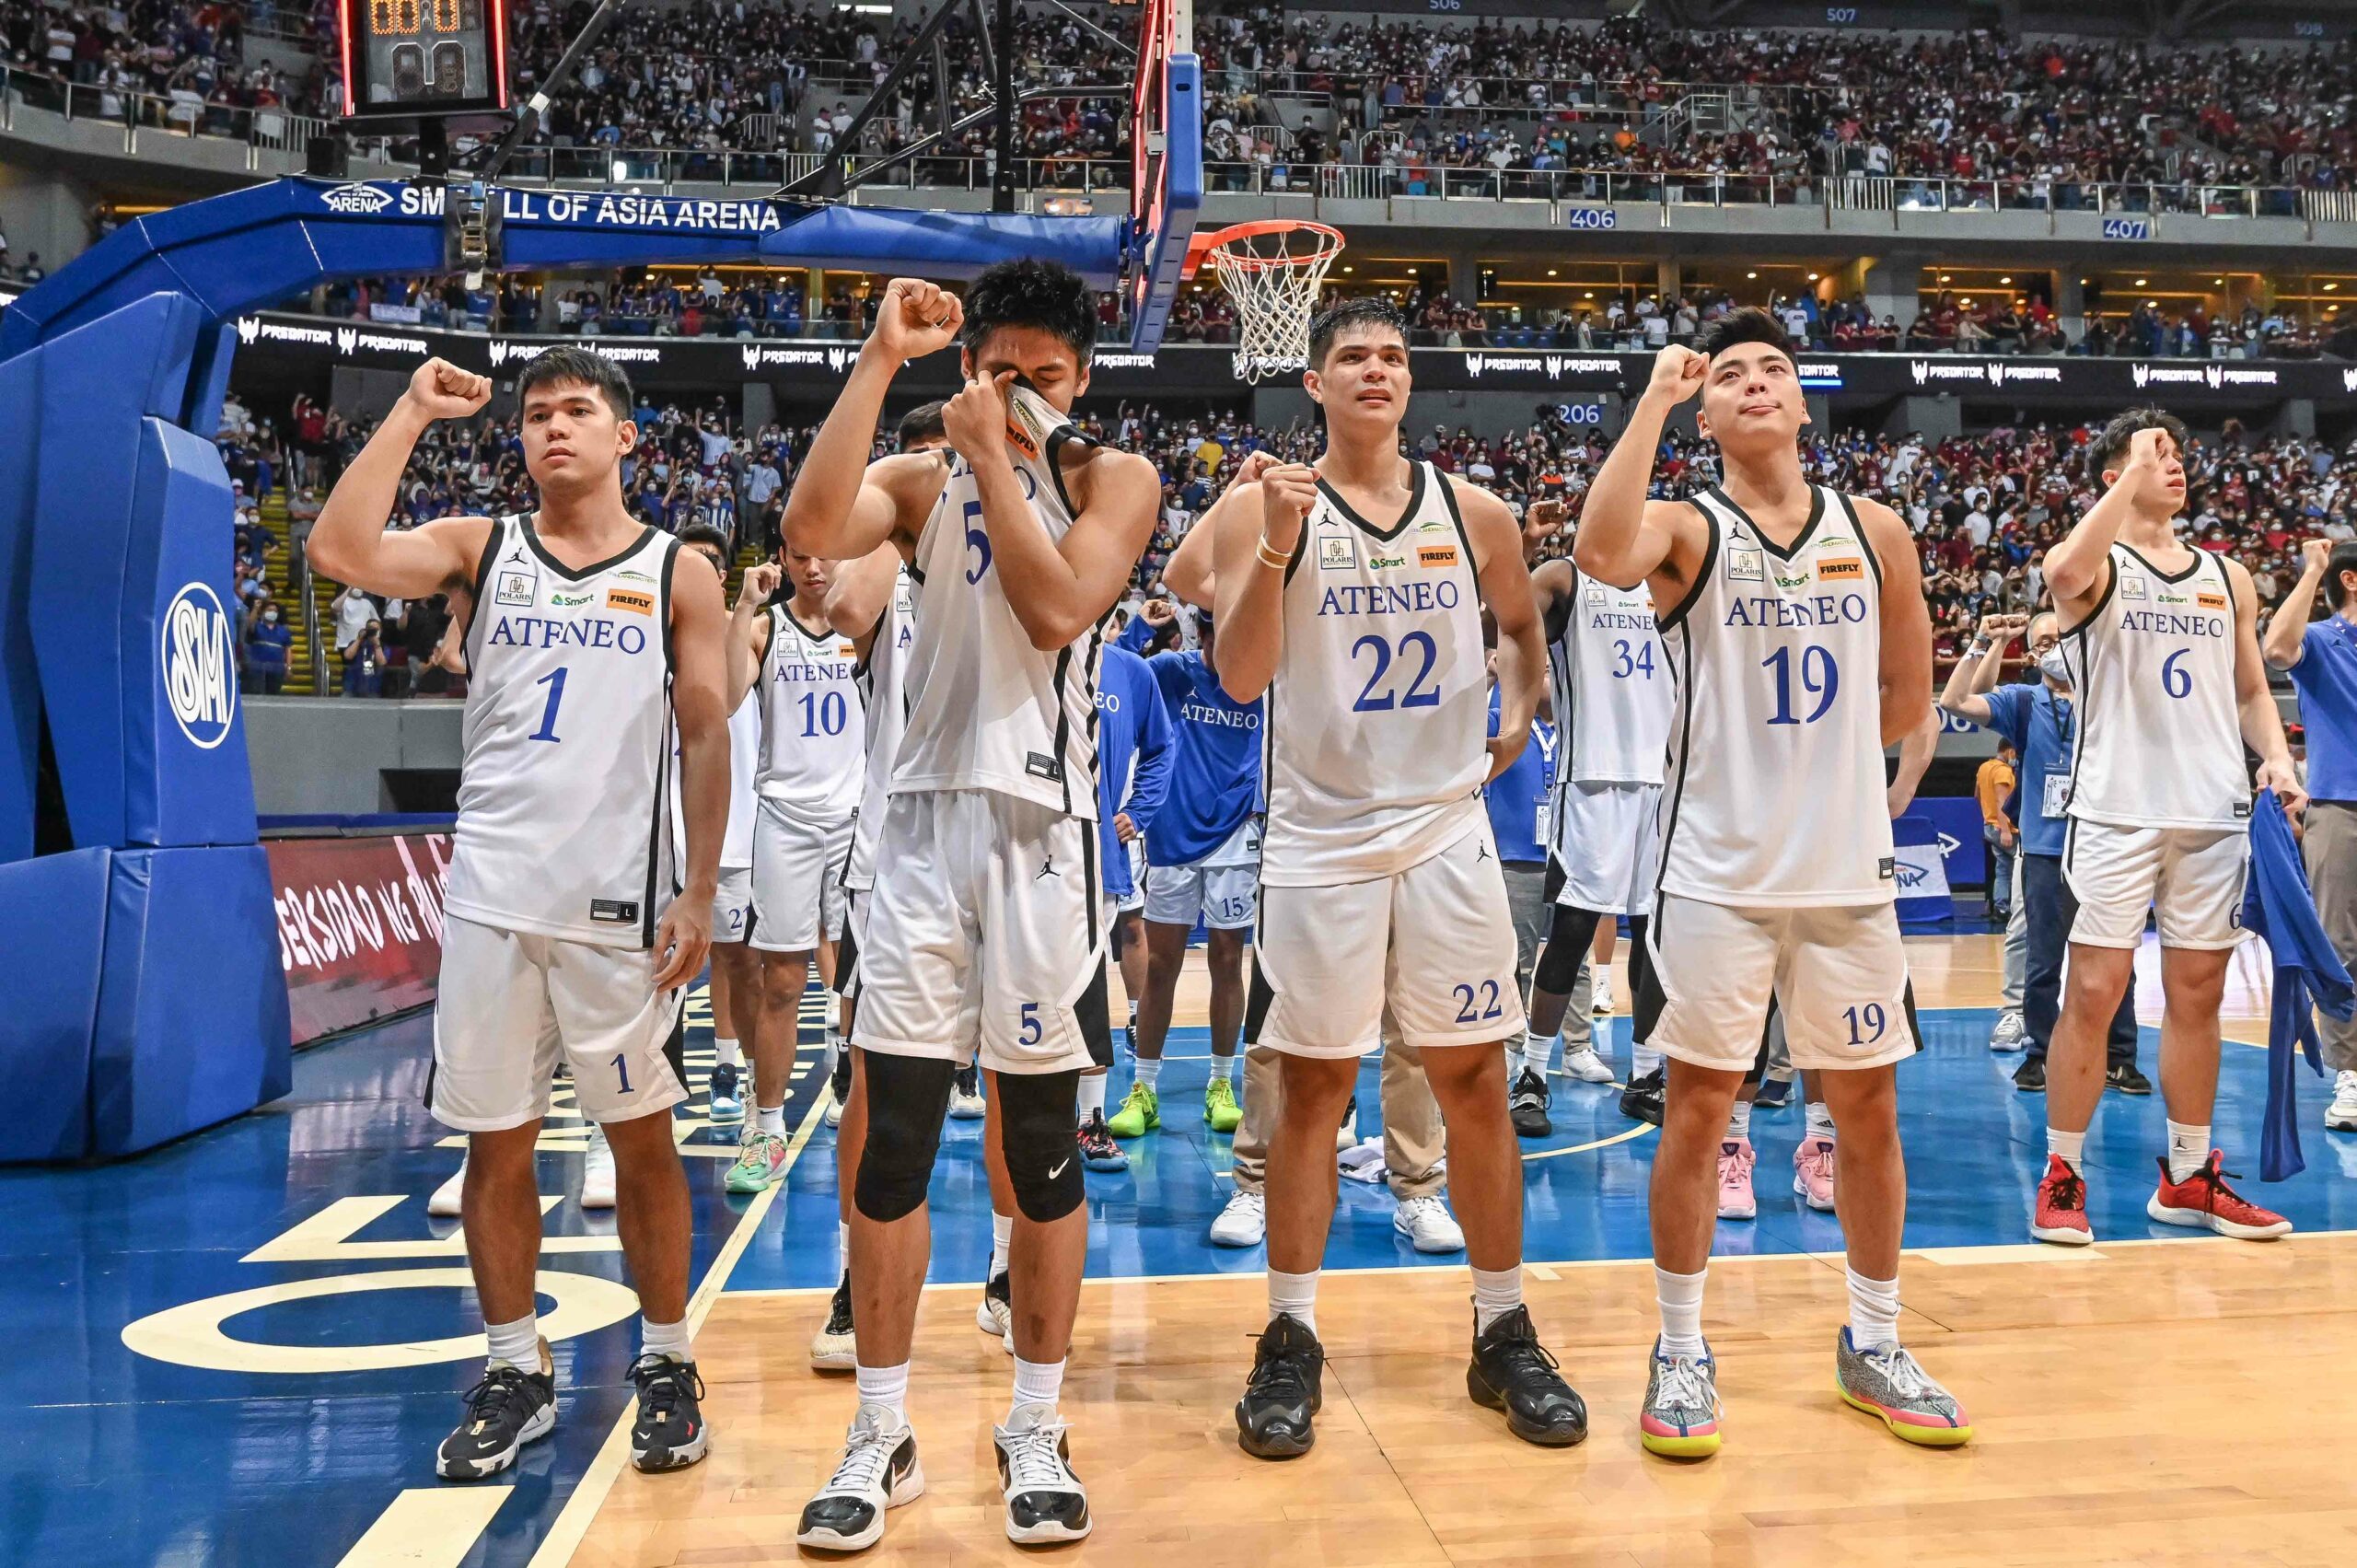 UAAP-84-Mens-Basketball-Ateneo-vs-UP-Ateneo-3-scaled Ateneo's WVT makes sure to get back at UP for MBT bros ADMU News UAAP Volleyball  - philippine sports news